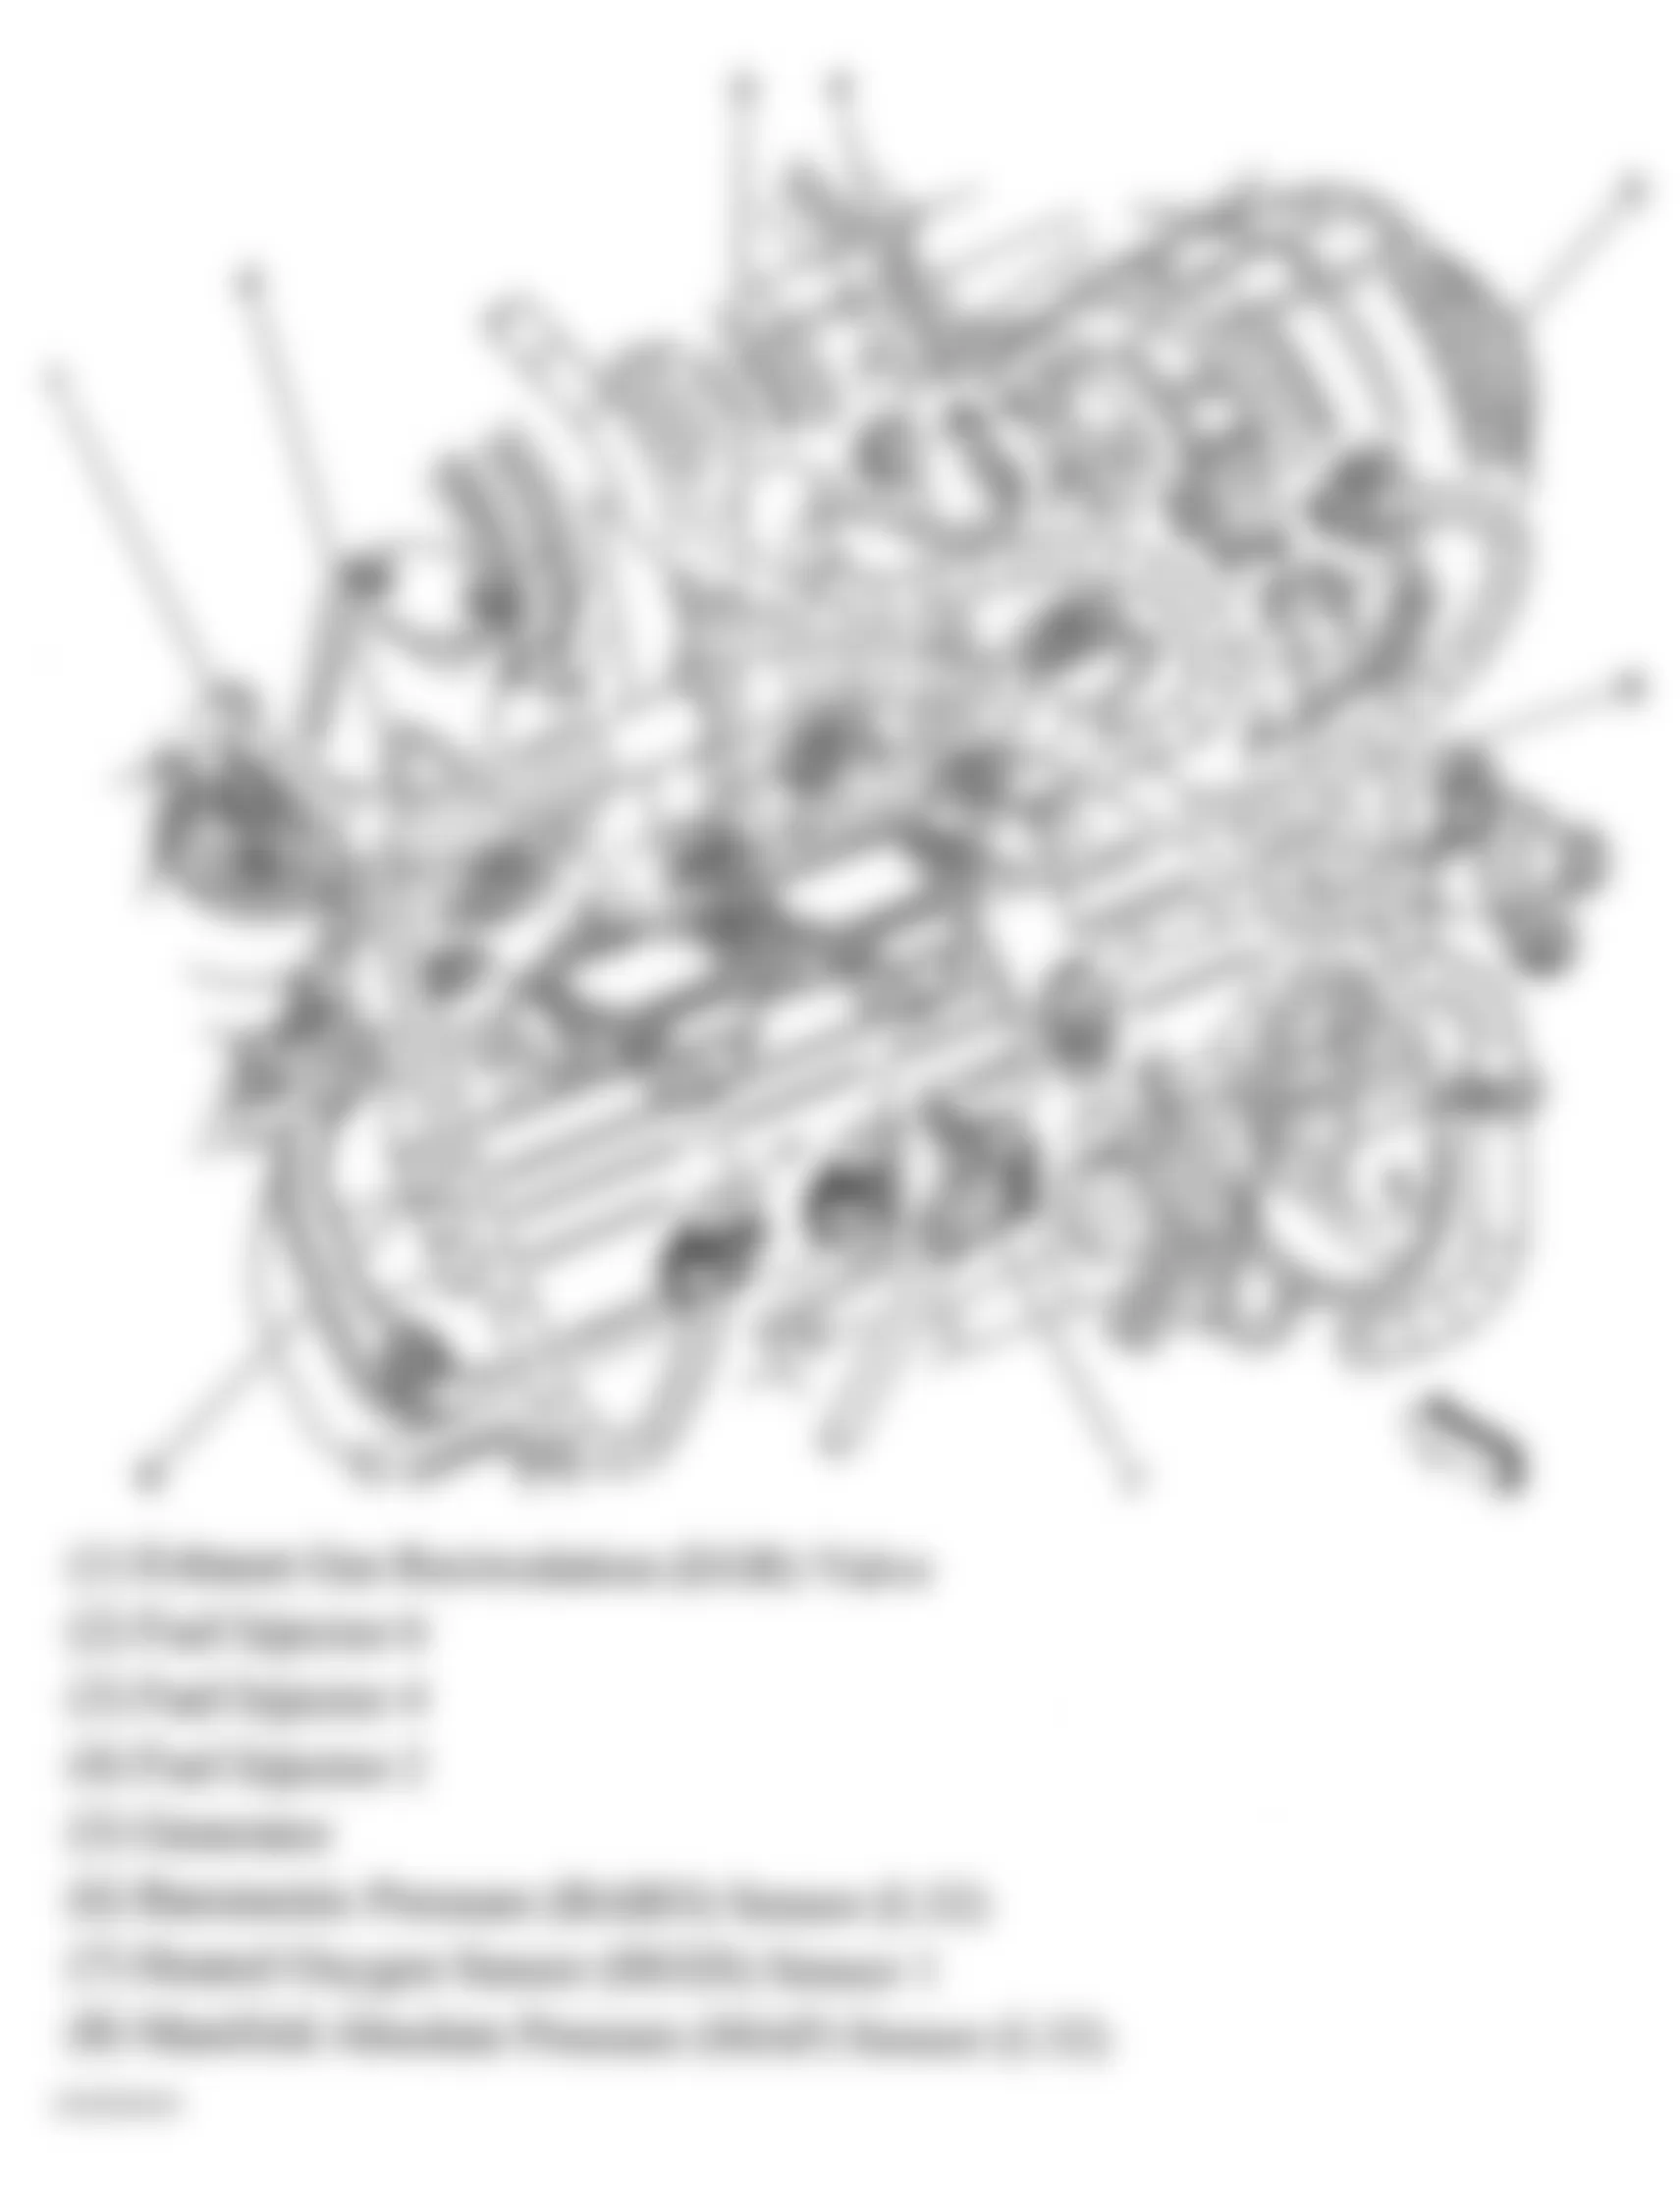 Buick LaCrosse CX 2005 - Component Locations -  Left Rear Of Engine (3.8L)